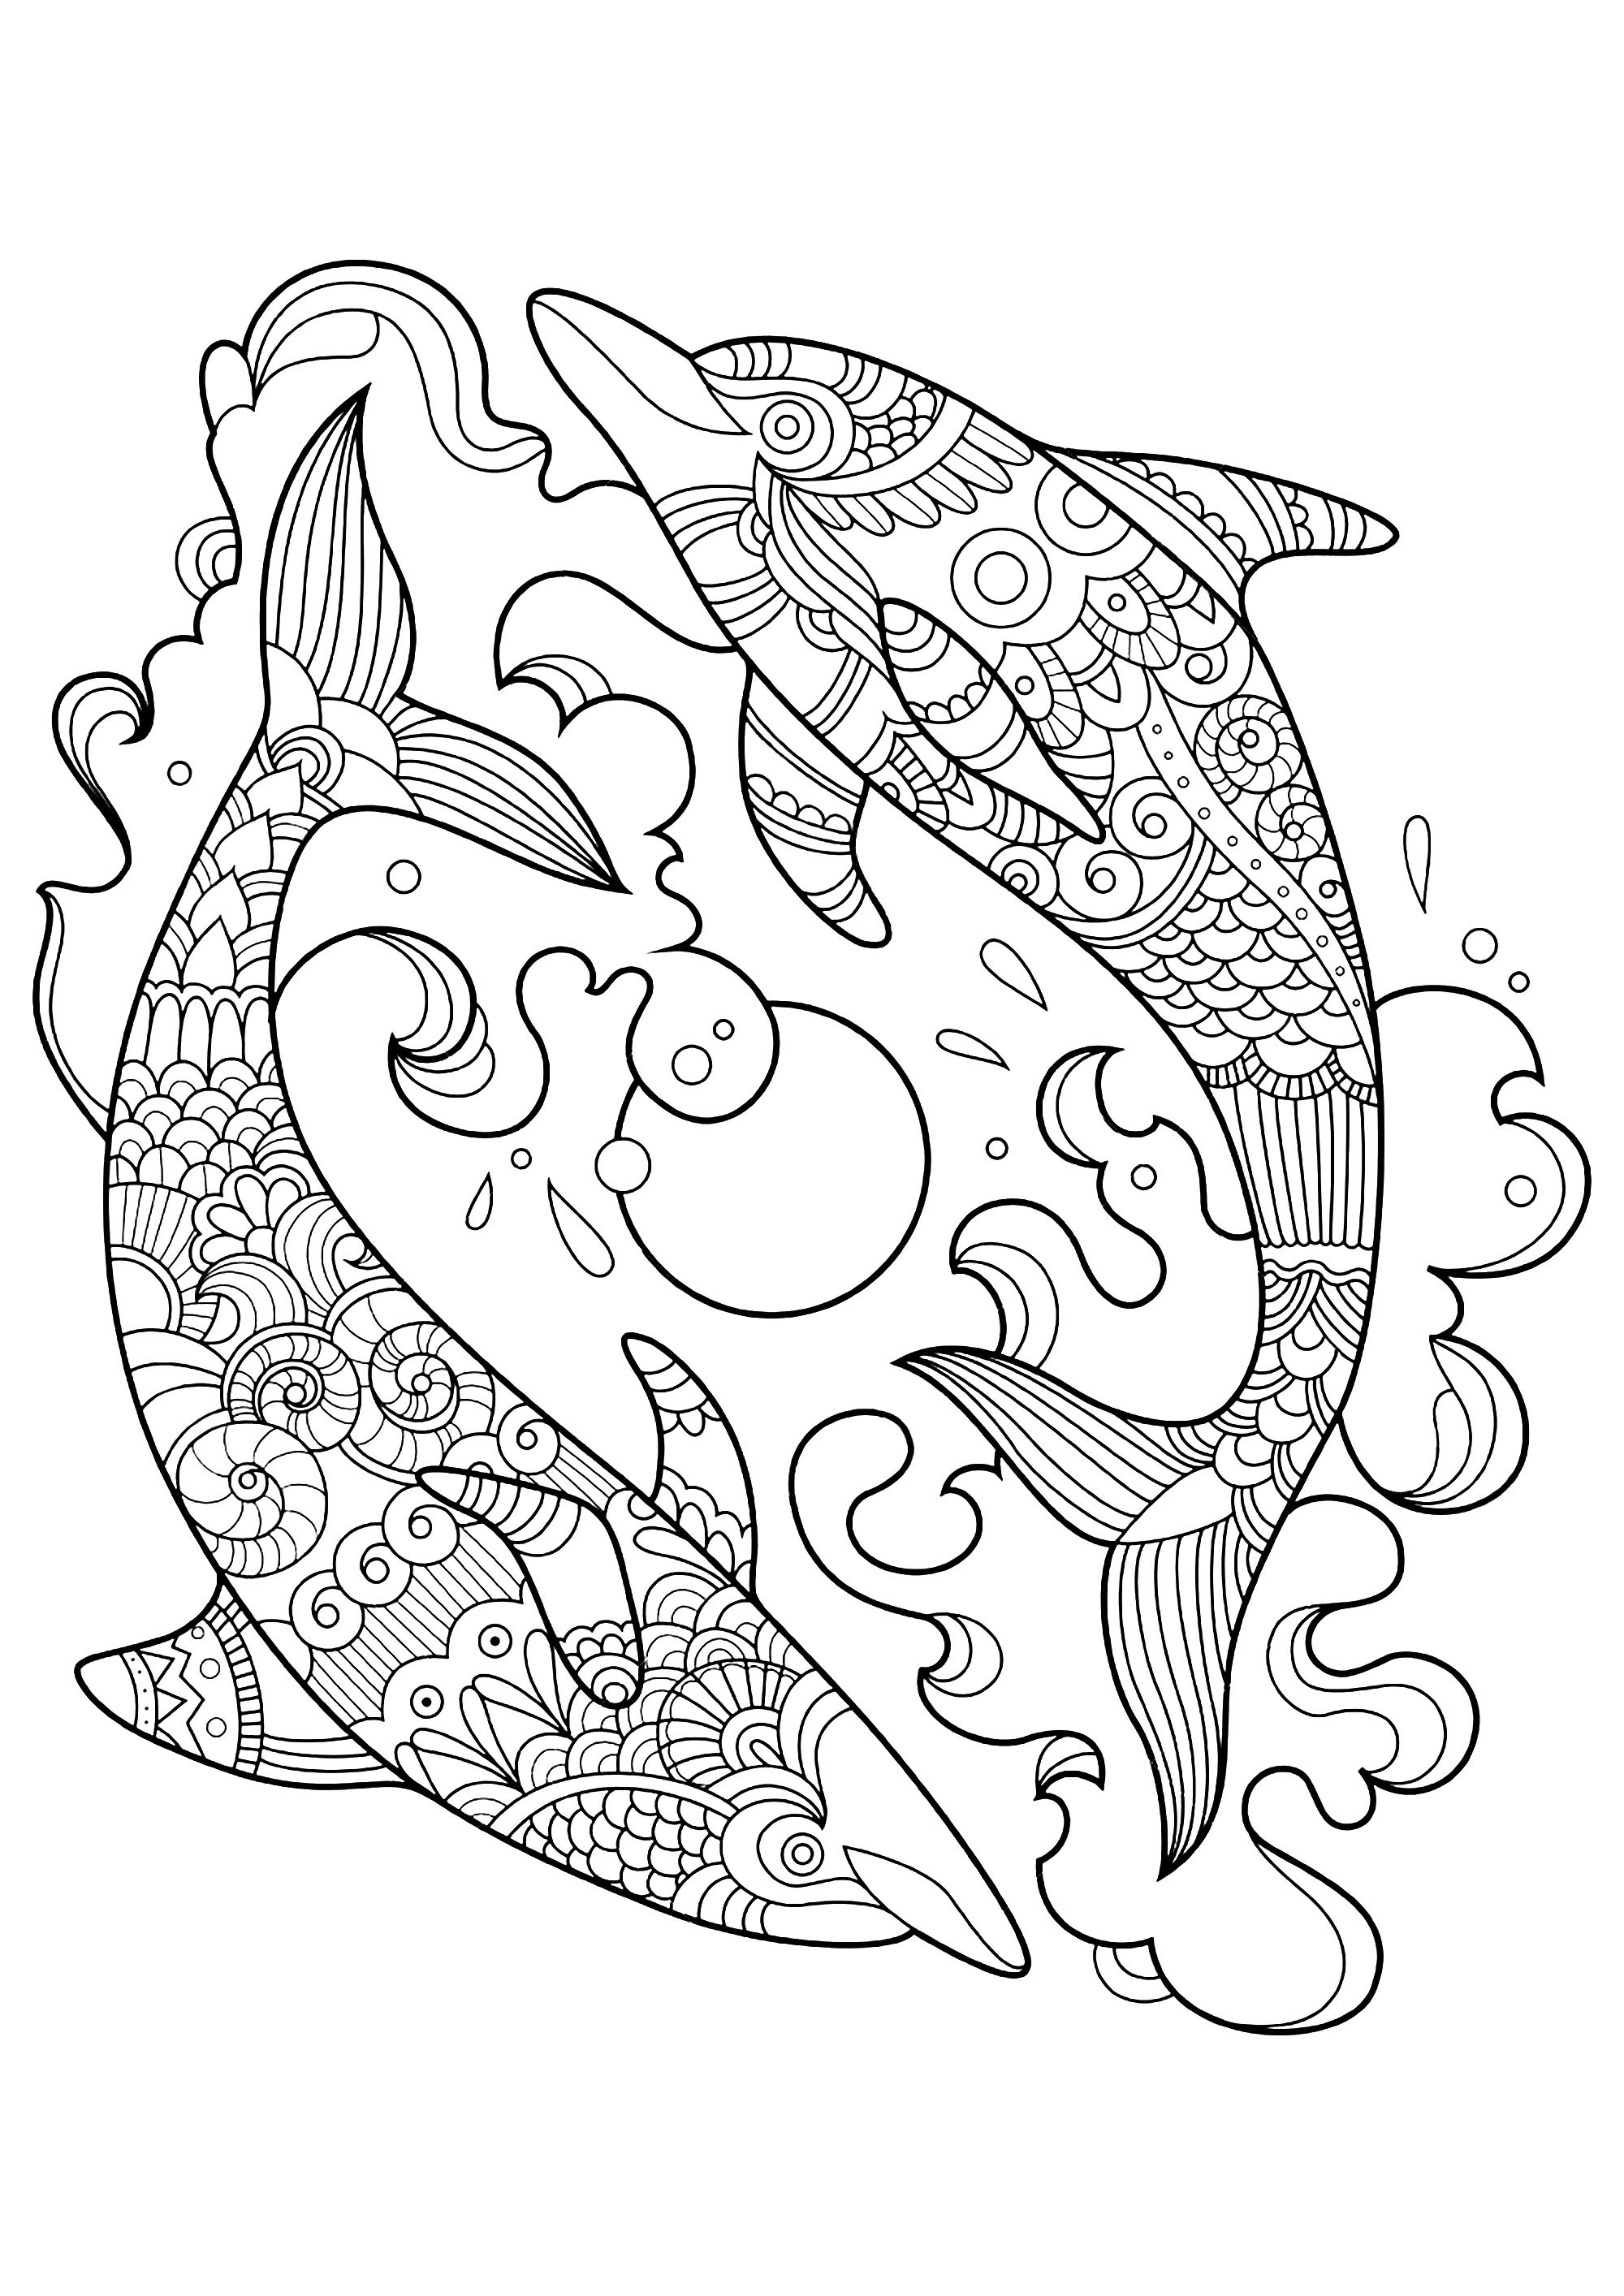 Dolphin drawing to download and print for children